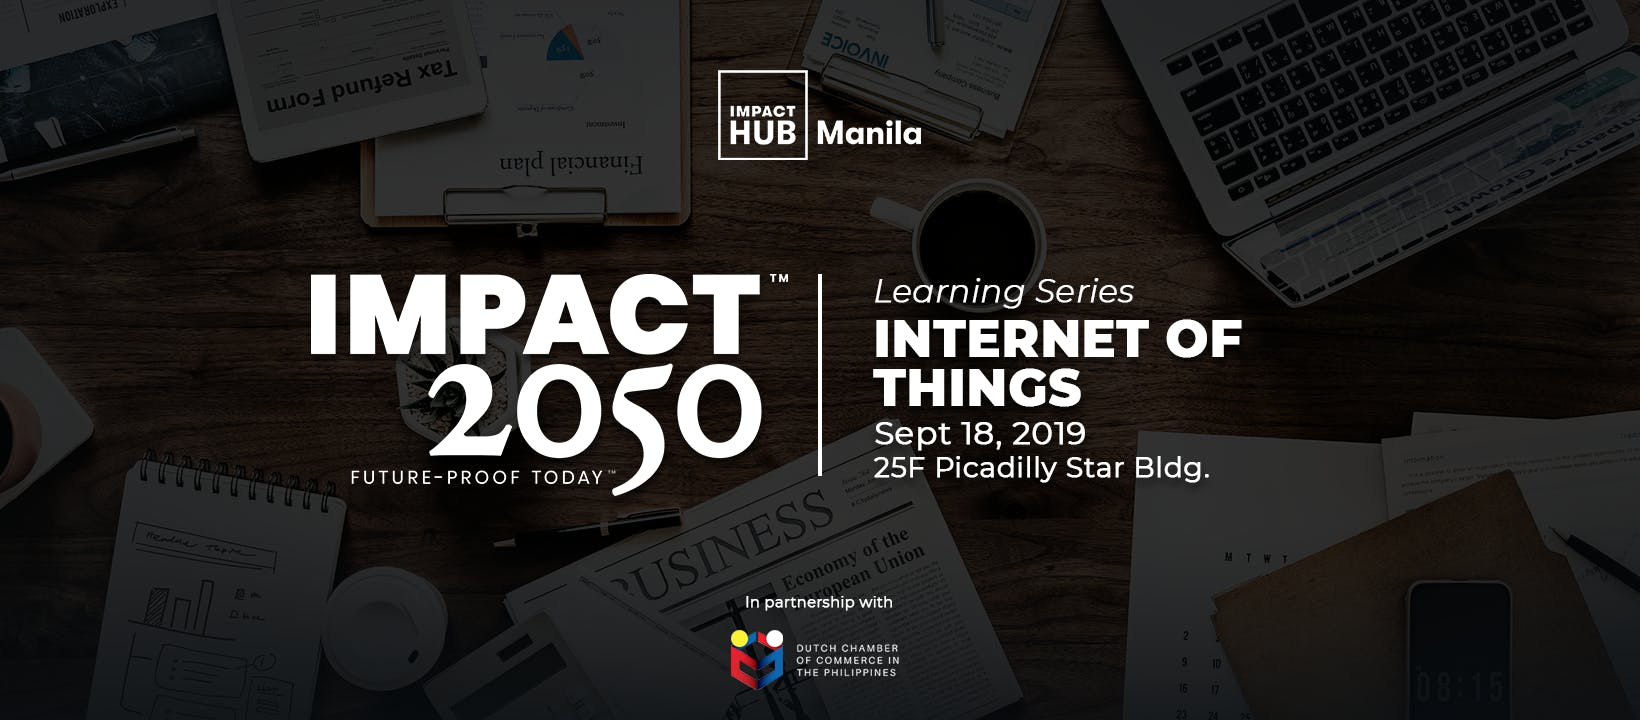 Impact 2050 Learning Sessions: Smart Cities